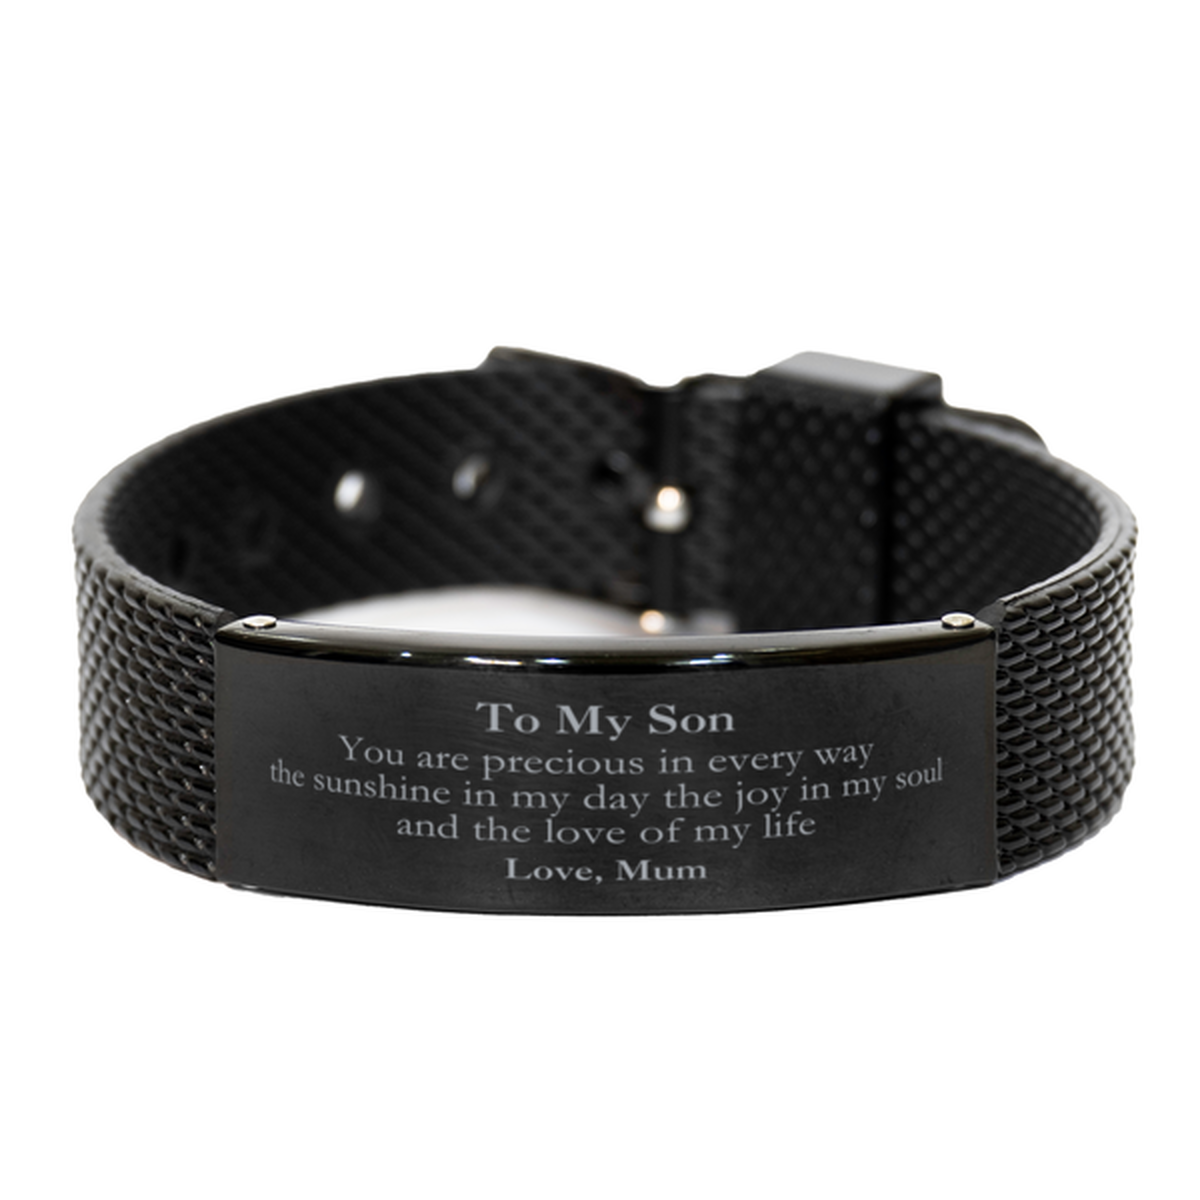 Graduation Gifts for Son Black Shark Mesh Bracelet Present from Mum, Christmas Son Birthday Gifts Son You are precious in every way the sunshine in my day. Love, Mum